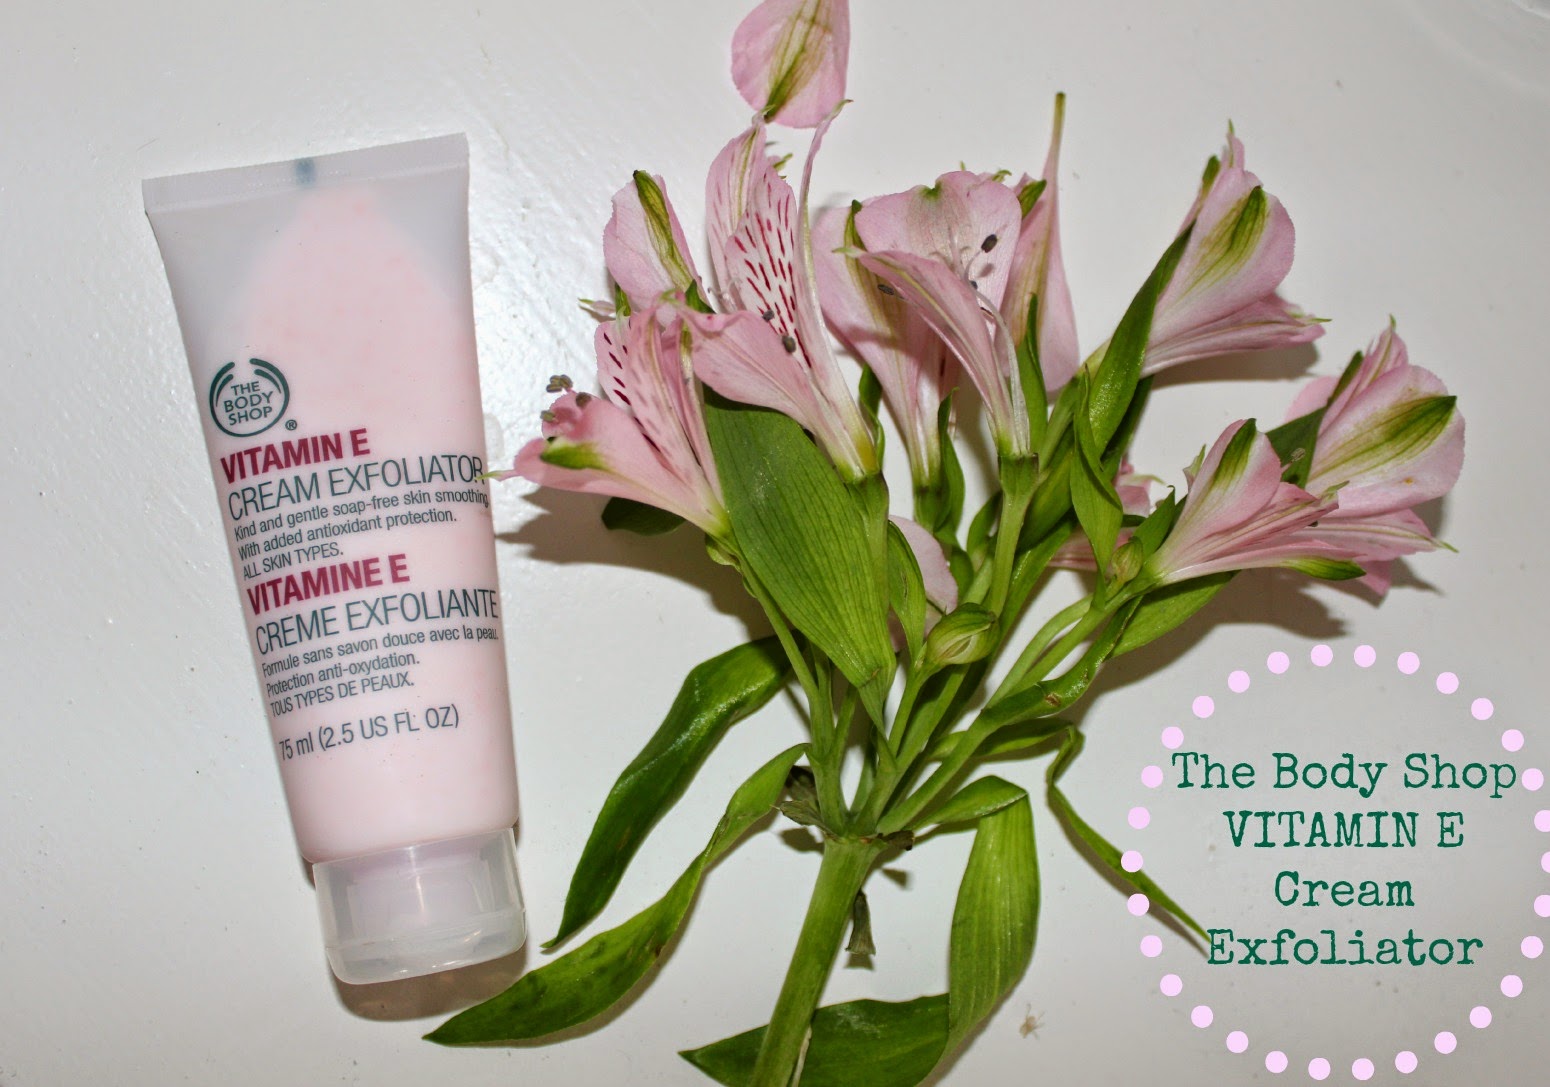 Verkoper Over instelling nek The Cleanser beauty blog: The Body Shop Vitamin E Cream Exfoliator Review:  the most gentle face scrub you could wish for!